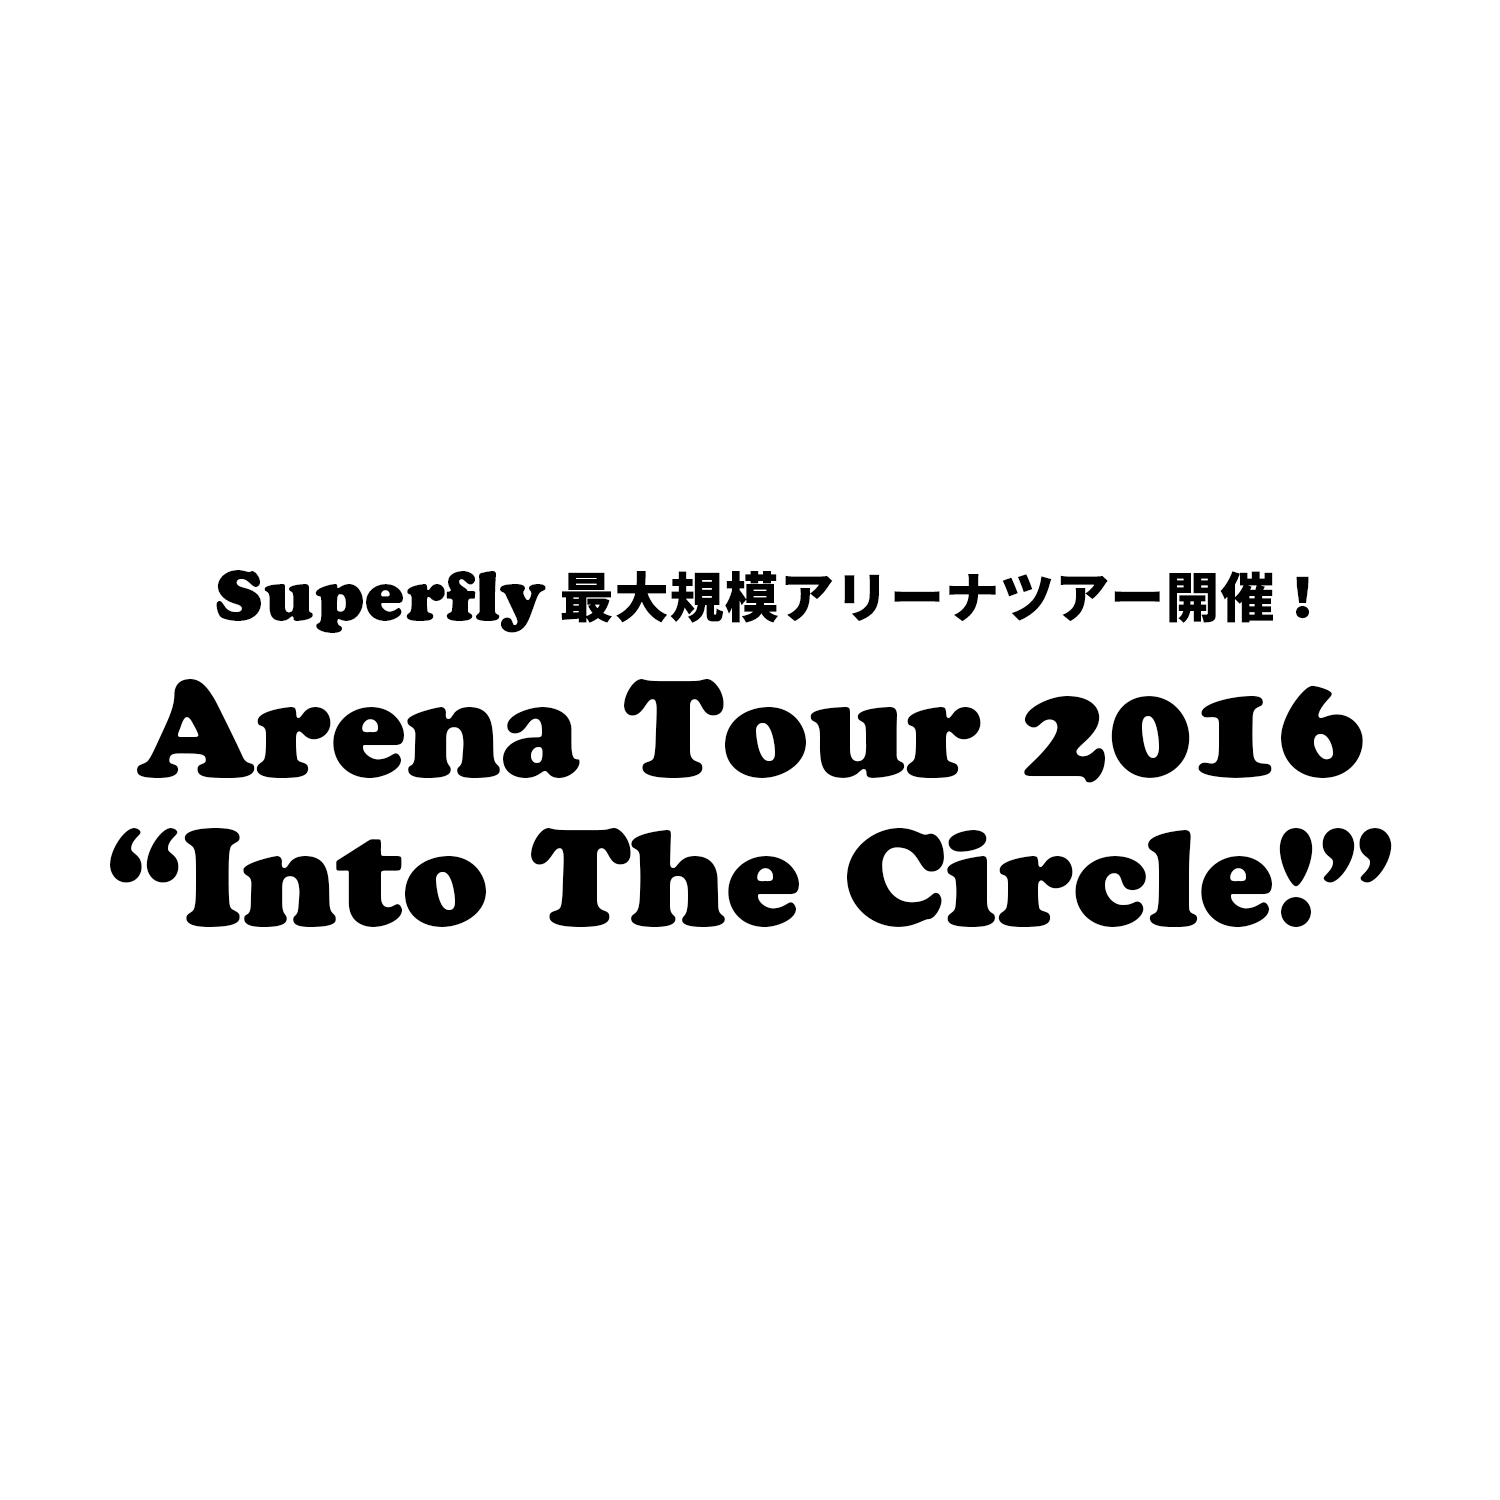 Superfly Arena Tour 16 Into The Circle